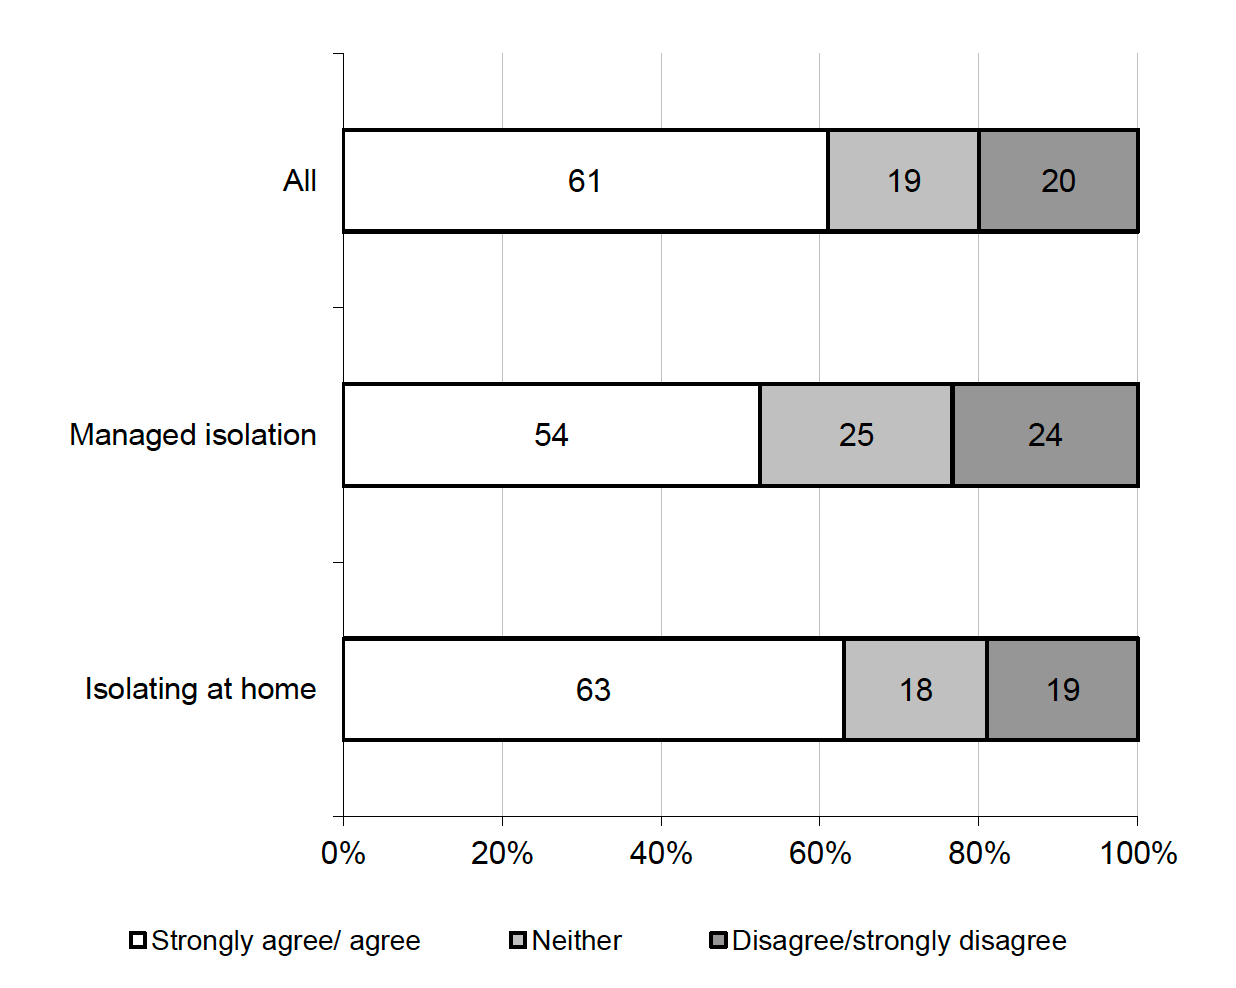 Figure 5.7 Levels of agreement with statement ‘international travel restrictions will help reduce the spread of COVID-19 and new variants of it’ by arrangement type (%, All International Traveller participants and breakdown)
61% of International Travellers strongly agreed, higher among those isolating at home (63%) than in managed isolation (54%)
